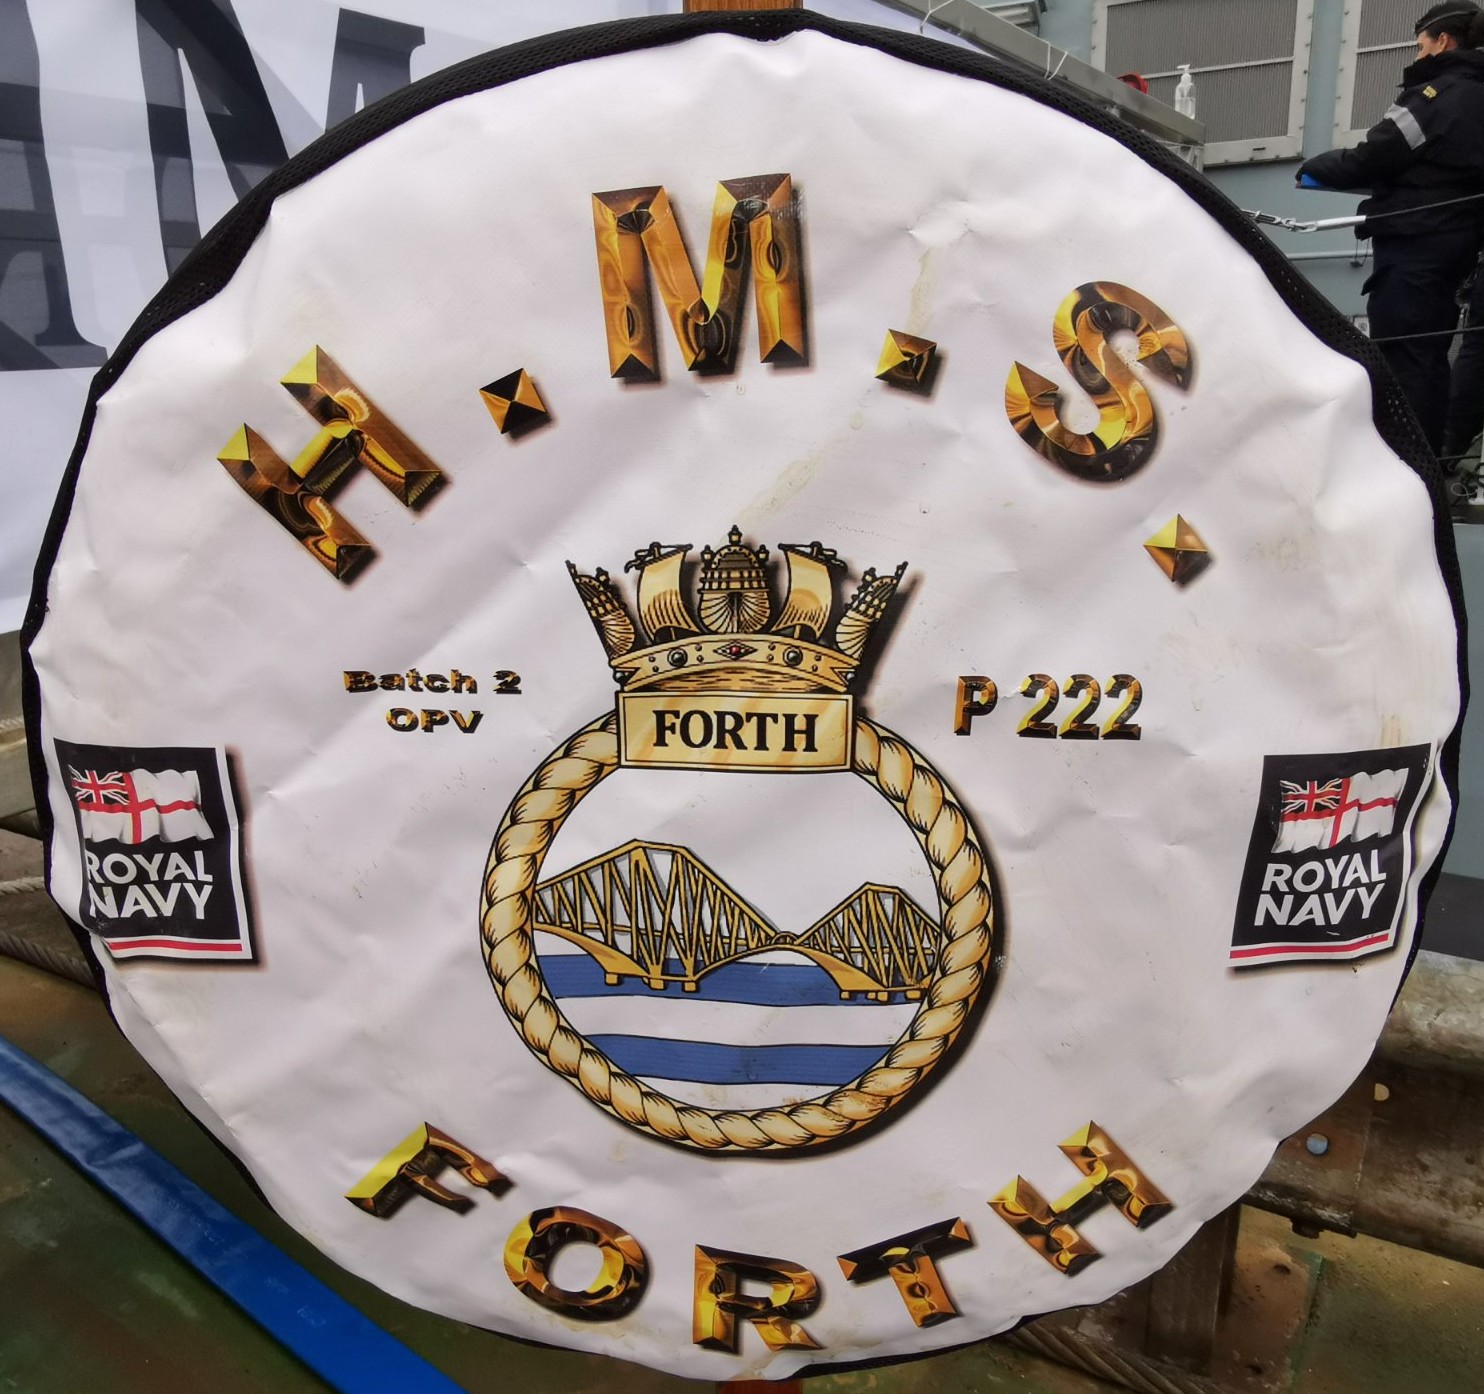 p222 hms forth insignia crest patch badge river class offshore patrol vessel opv royal navy 05c